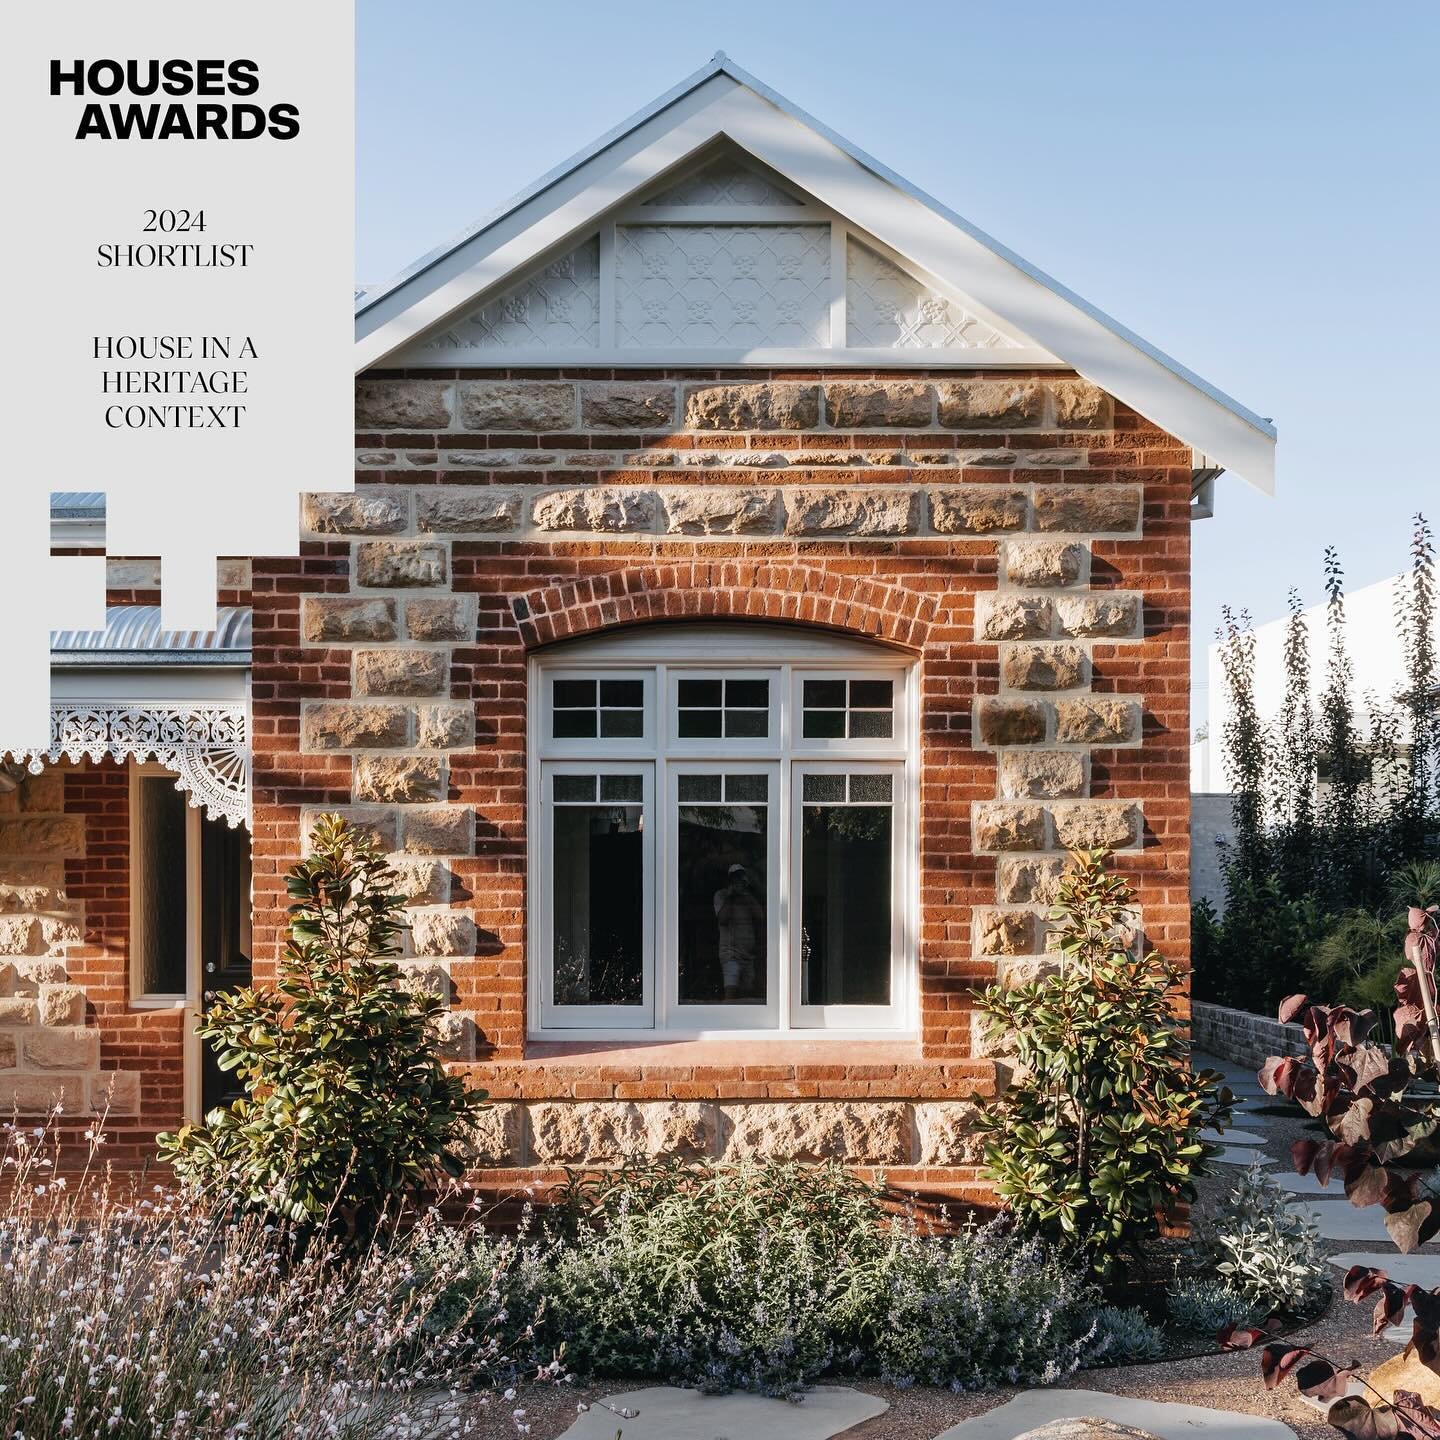 Chuffed to be selected as one of four SA projects to be shortlisted amongst the amazing work across Australia at this year&rsquo;s Houses Awards.